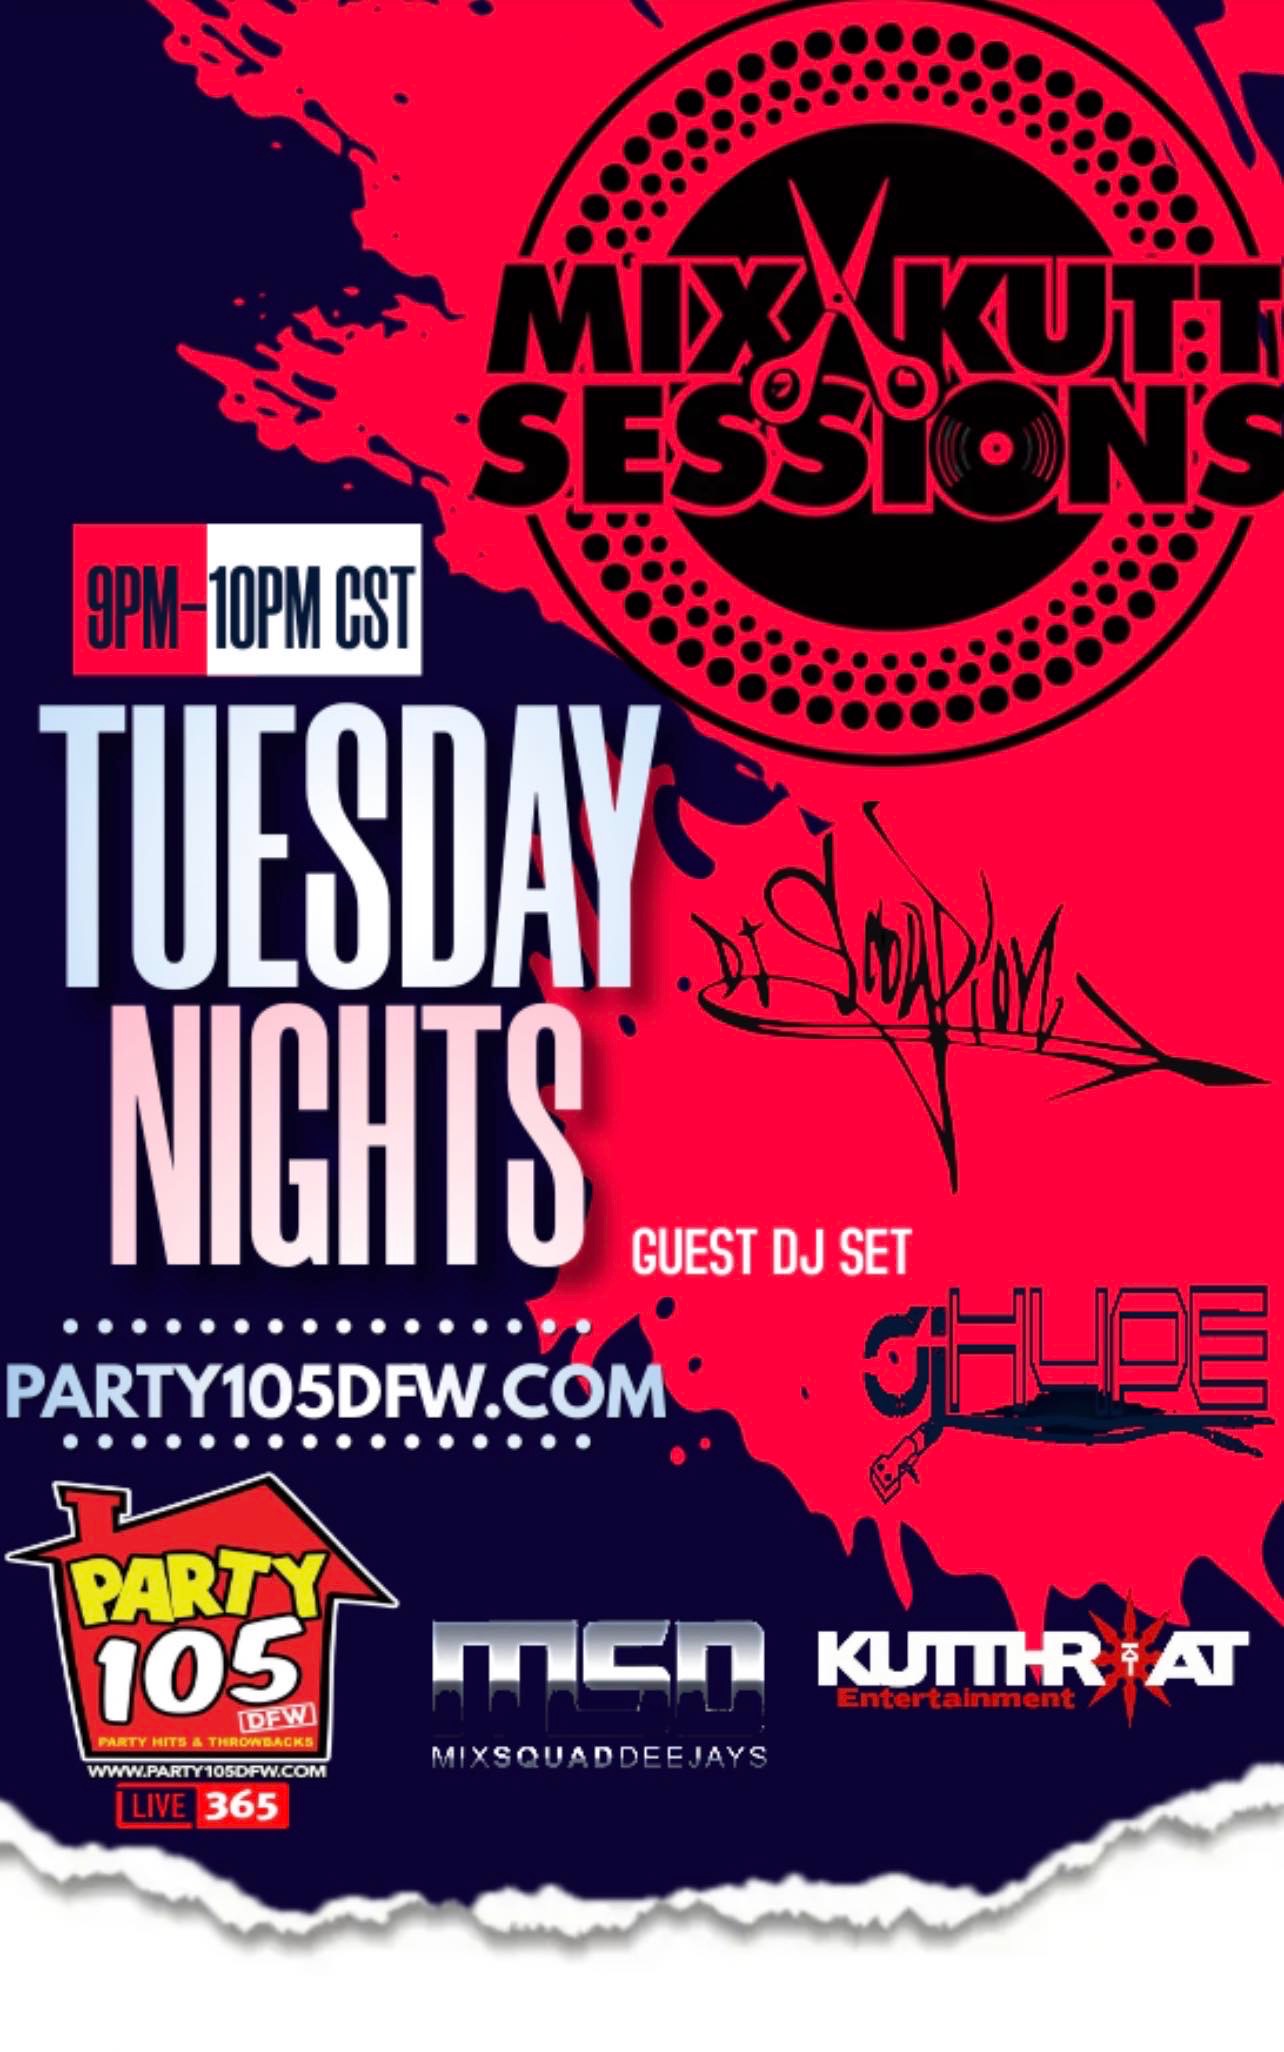 Art for PARTY 105 DFW Today's Hits y Mas @party105dfw by MIXXKUTTSESSIONS NEW EPISODE #61 DJ SCORPION / Dj HYPE 31522